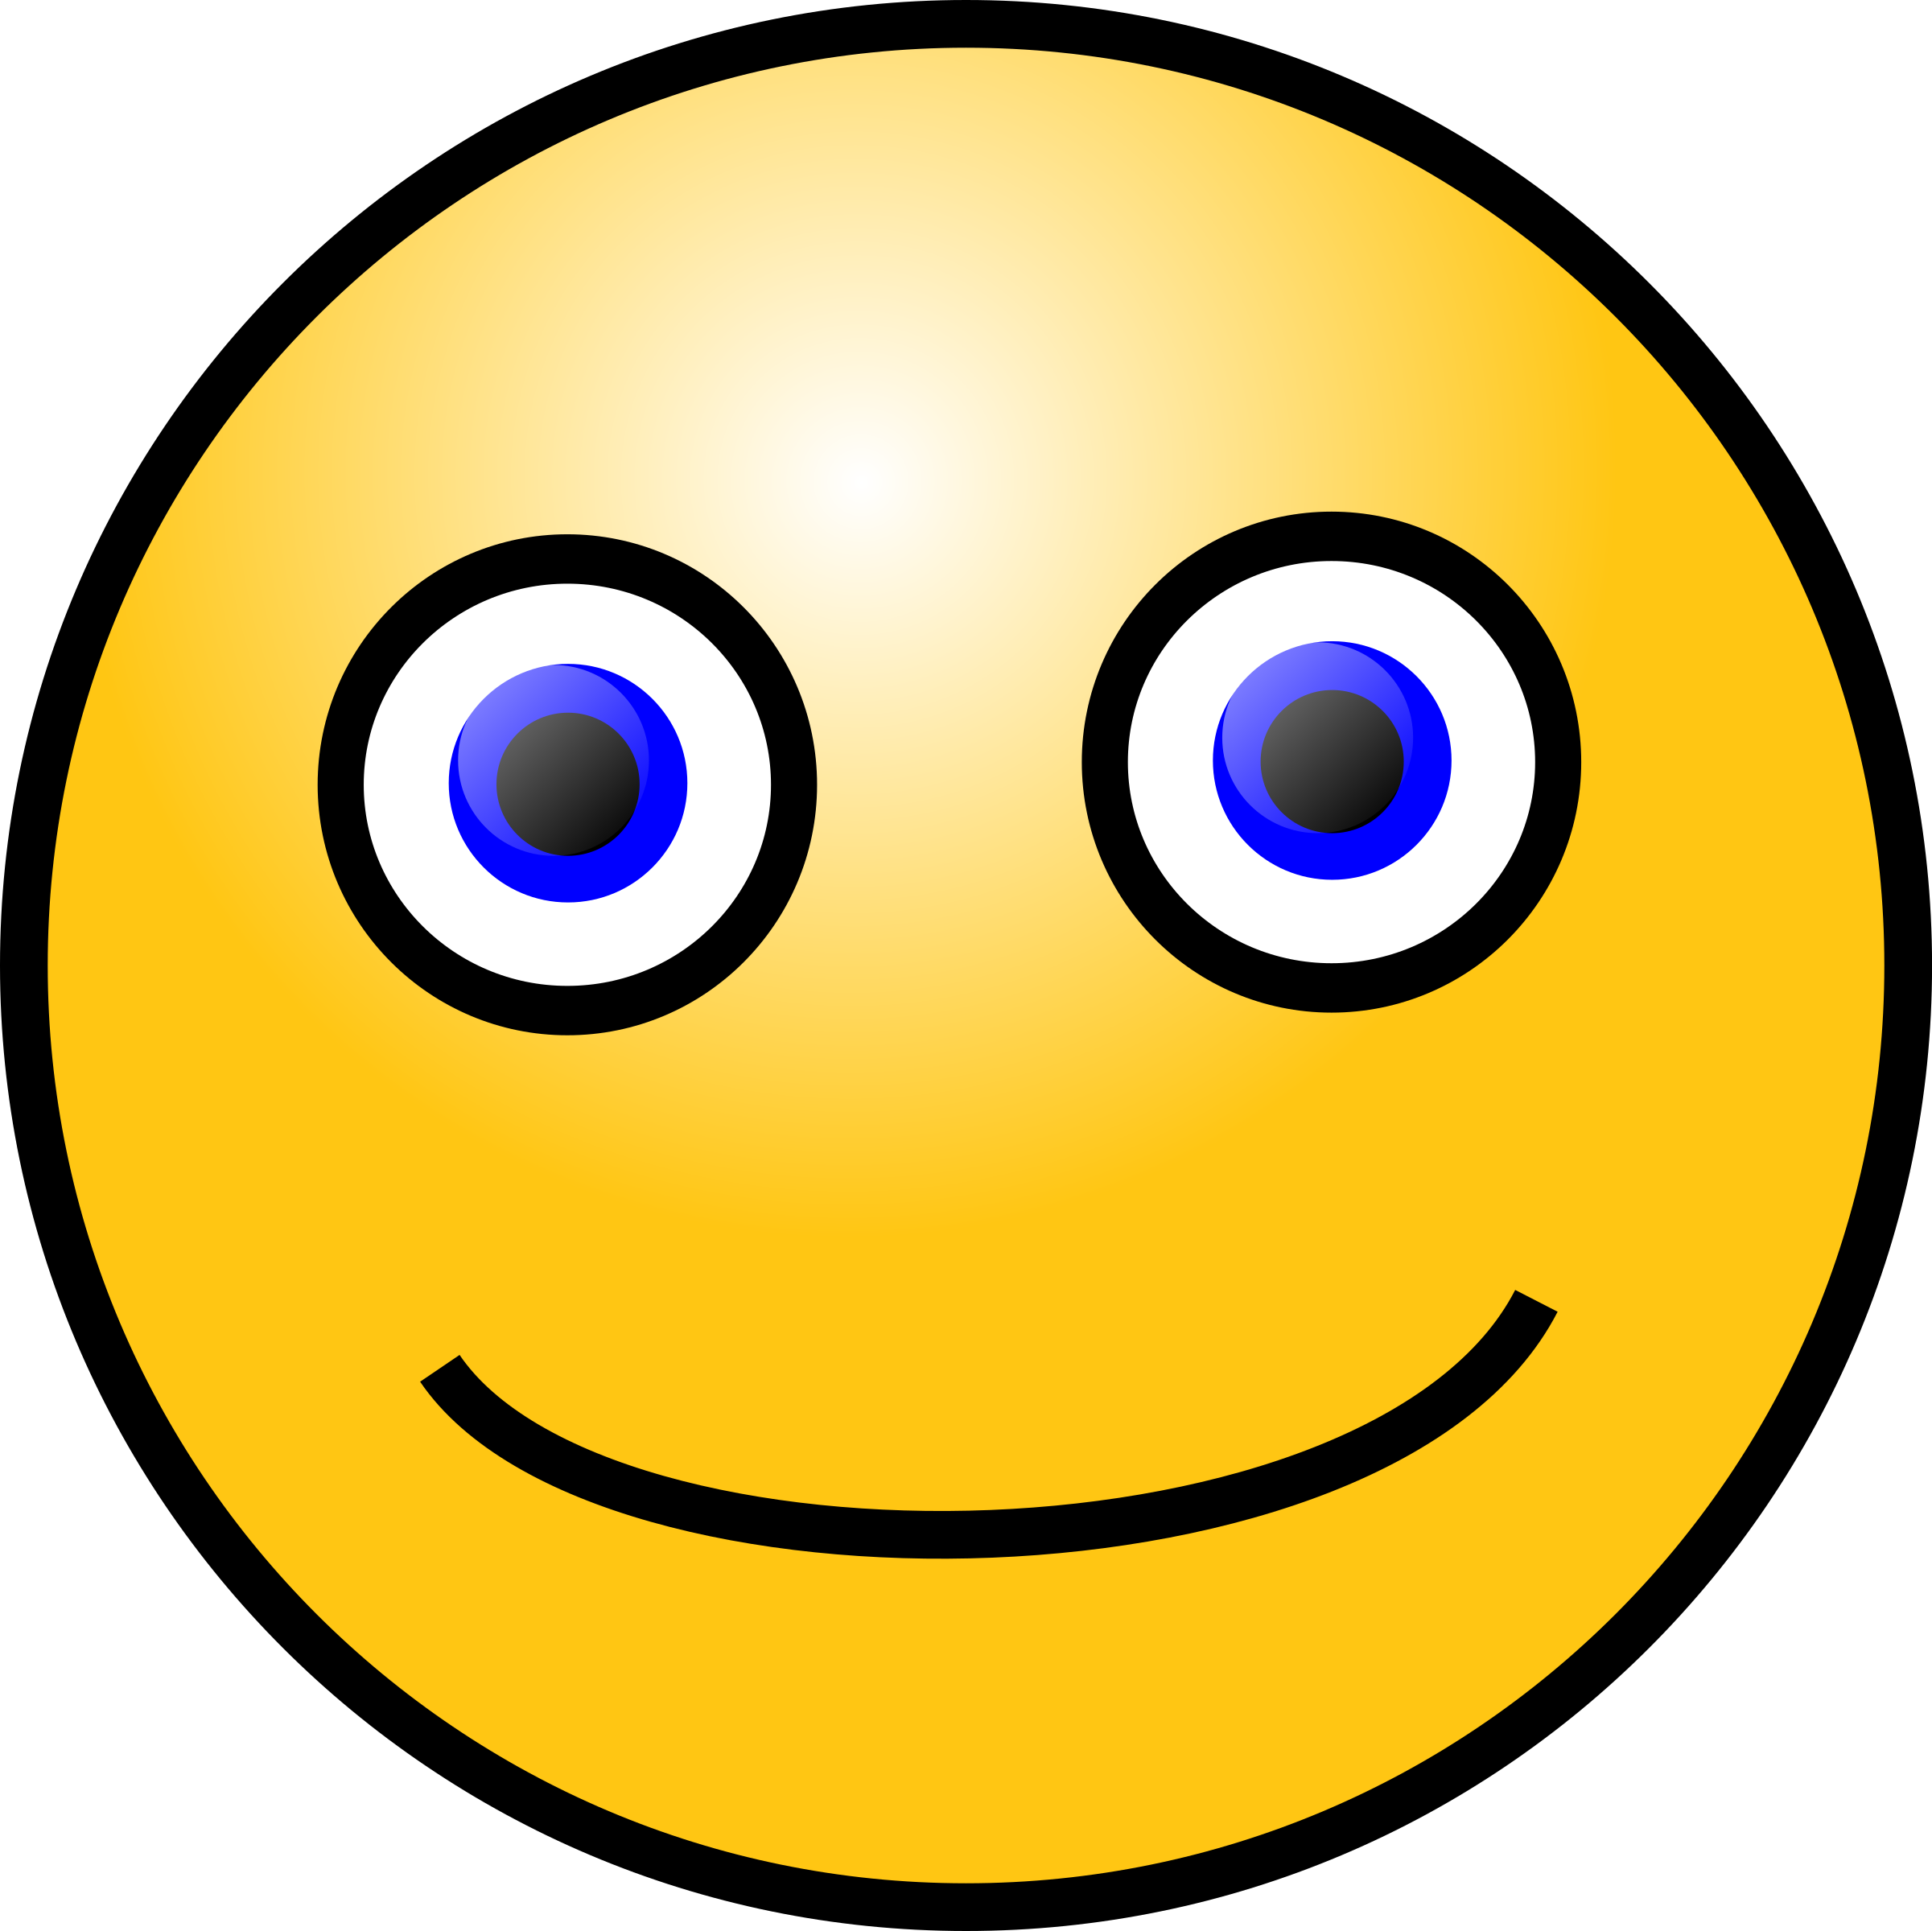 Clipart - Emoticons: Simple face